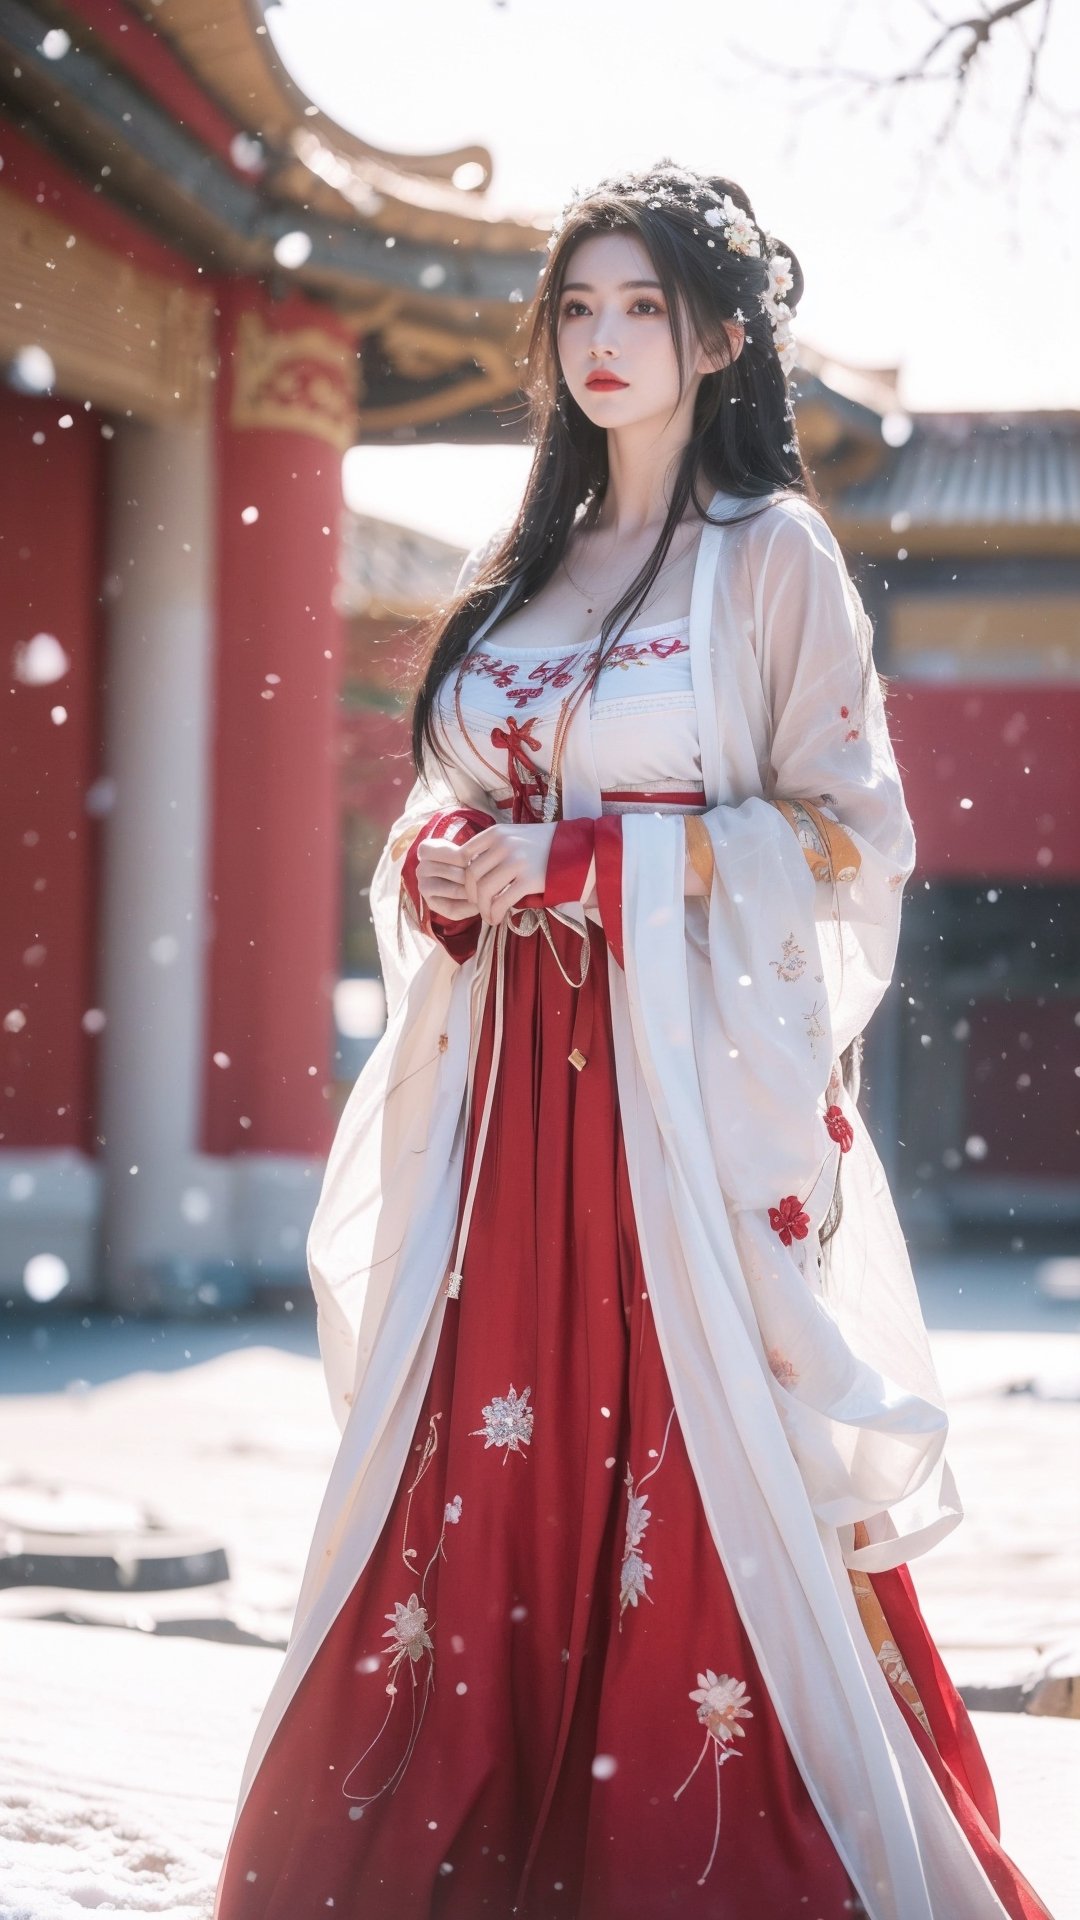 hanfu2, Best Quality, masterpiece, Super High Resolution, (realistic: 1.4) , (Snowing:1.5), 1 girl, (long hair:1.2),  (big breasts:1.59),hanfu,18-year-old,  (best quality, 8k, Masterpiece: 1.3) , exquisite (realistic style) , extreme face, photo-level lighting,  creamy skin, fair skin, high-detail skin, realistic skin details, visible pores, (super-detail) , (perfect body: 1.1) , long hair, (dynamic pose:1.3) , (big breasts:1.6),1girl,long skirt,long sleeves,HOG_Calligraphy_Tatoo,myhanfu,moyou,embroidered flower patterns,tangdynastyhanfu